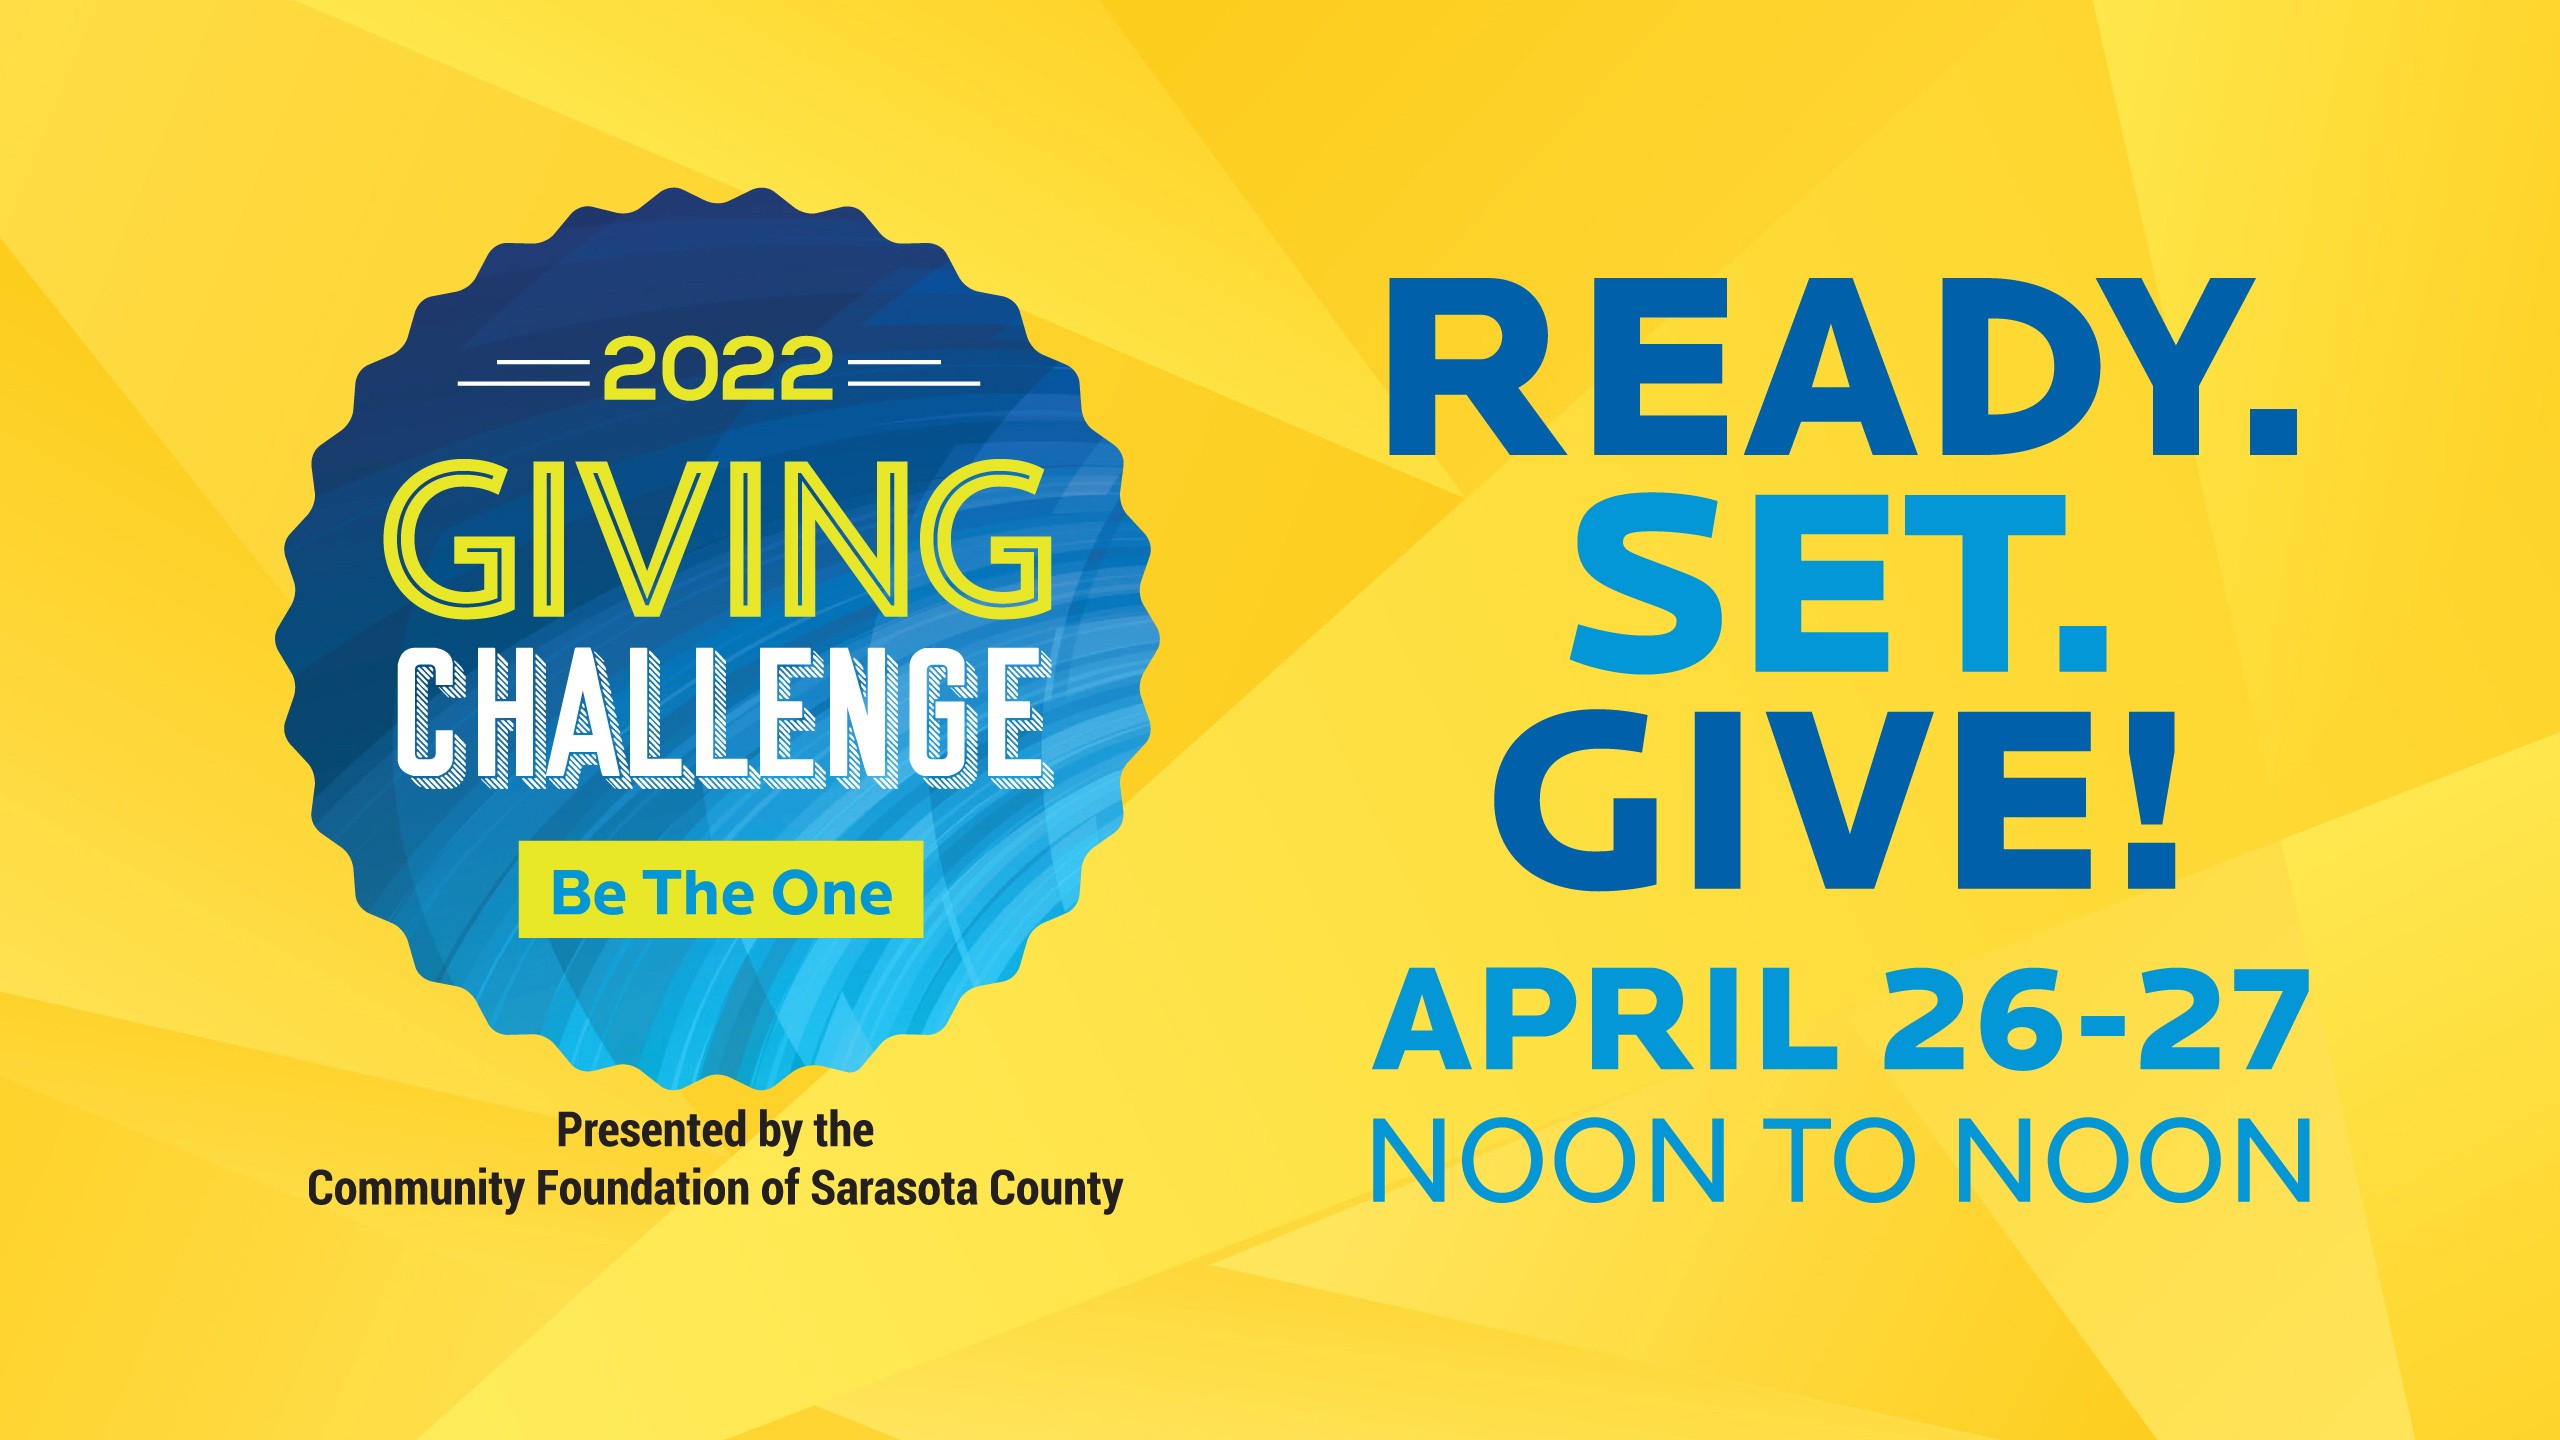 TAKE PART IN THE 2022 GIVING CHALLENGE Nates Honor Animal Rescue